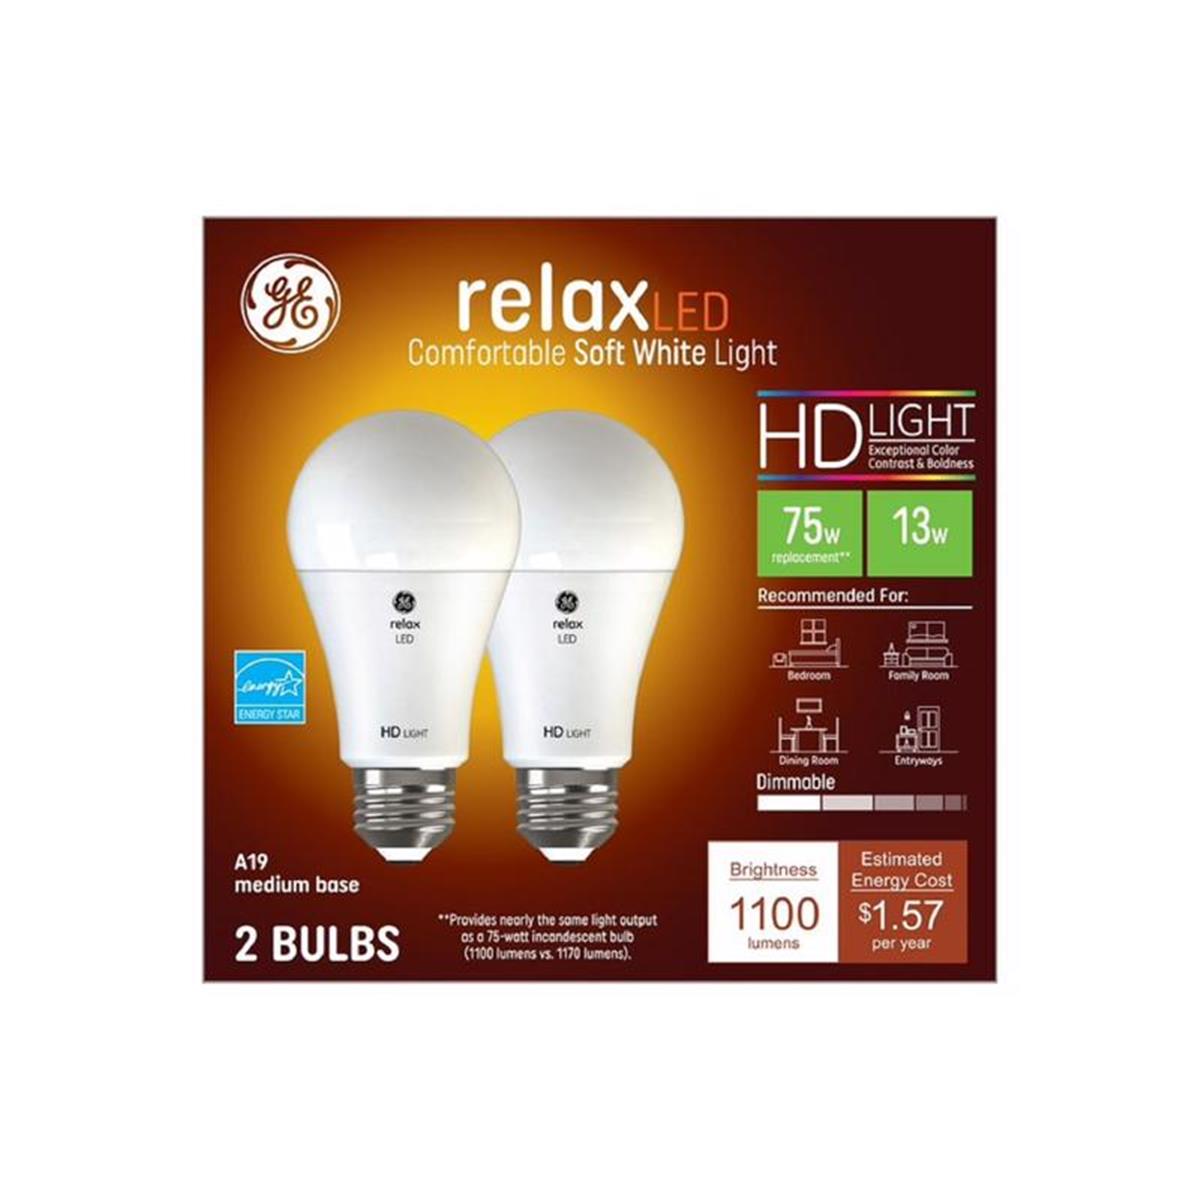 3006137 Relax HD A19 E26 Medium LED Light Bulb with 75 watt Equivalence, Soft White - Pack of 2 -  GE